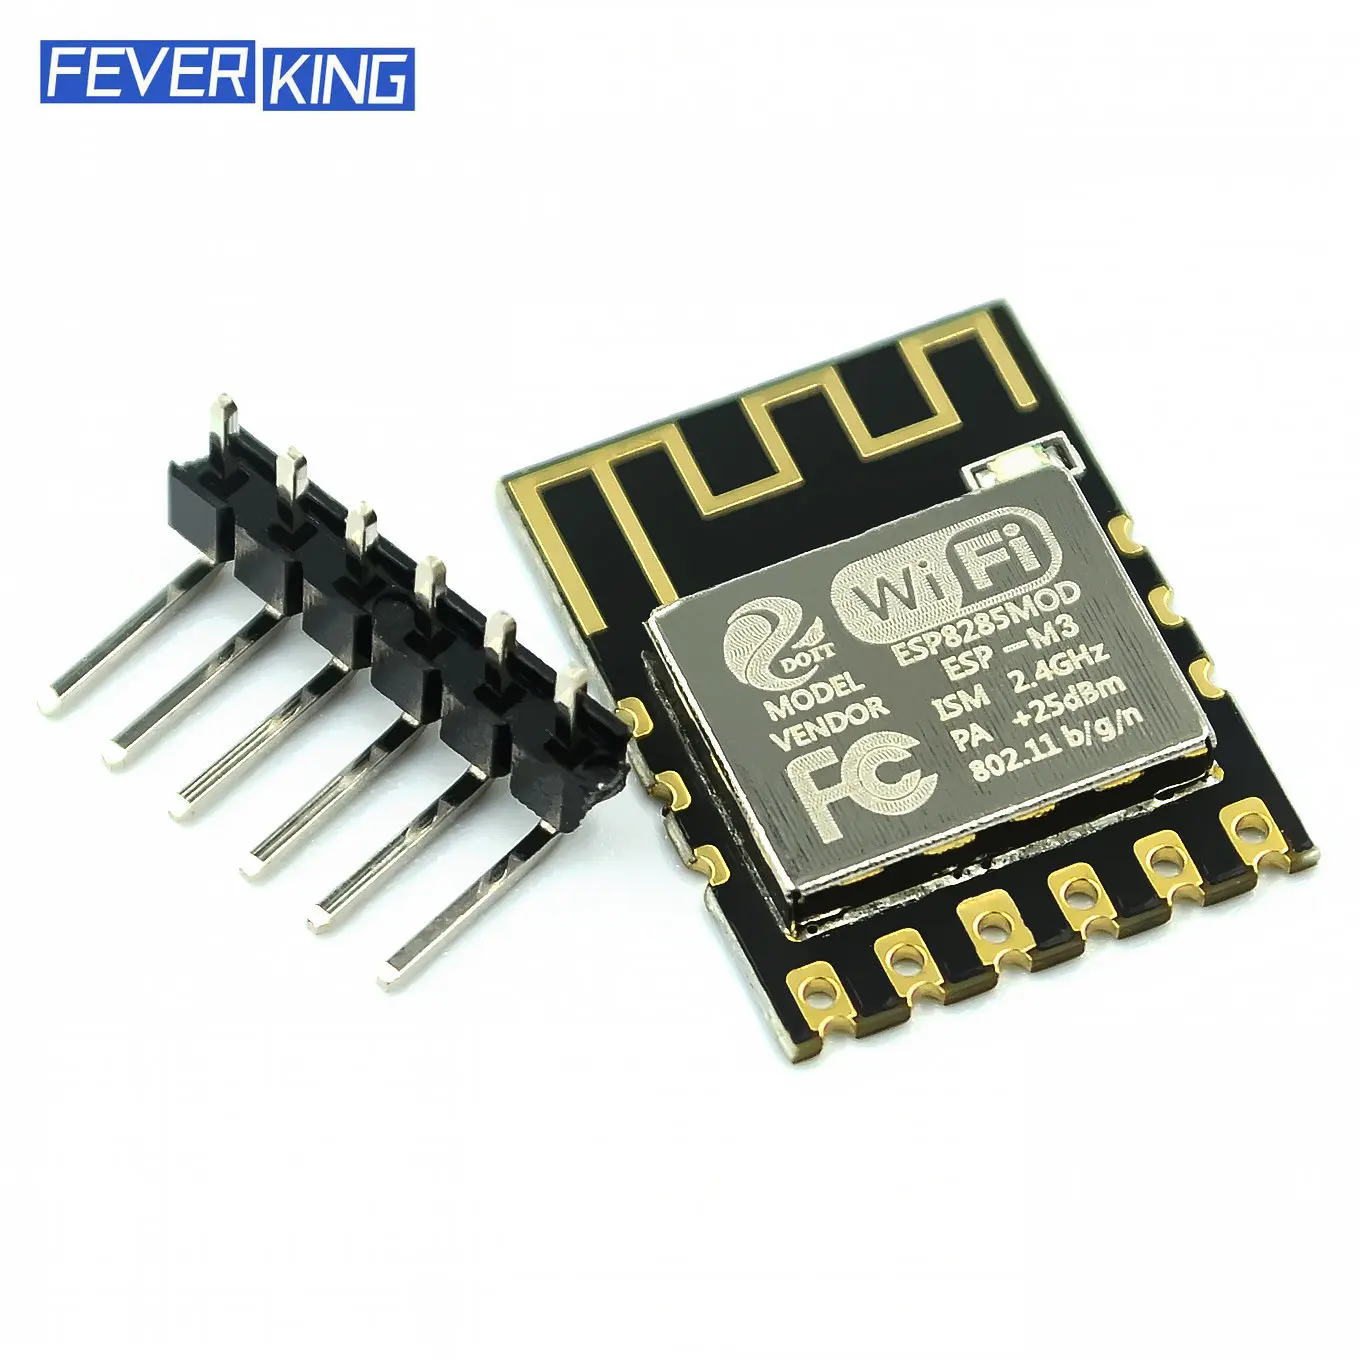 

Mini Ultra-Small Size From ESP8285 Serial Wireless WiFi Transmission Module ESP-M3 Fully Compatible Replace With ESP8266